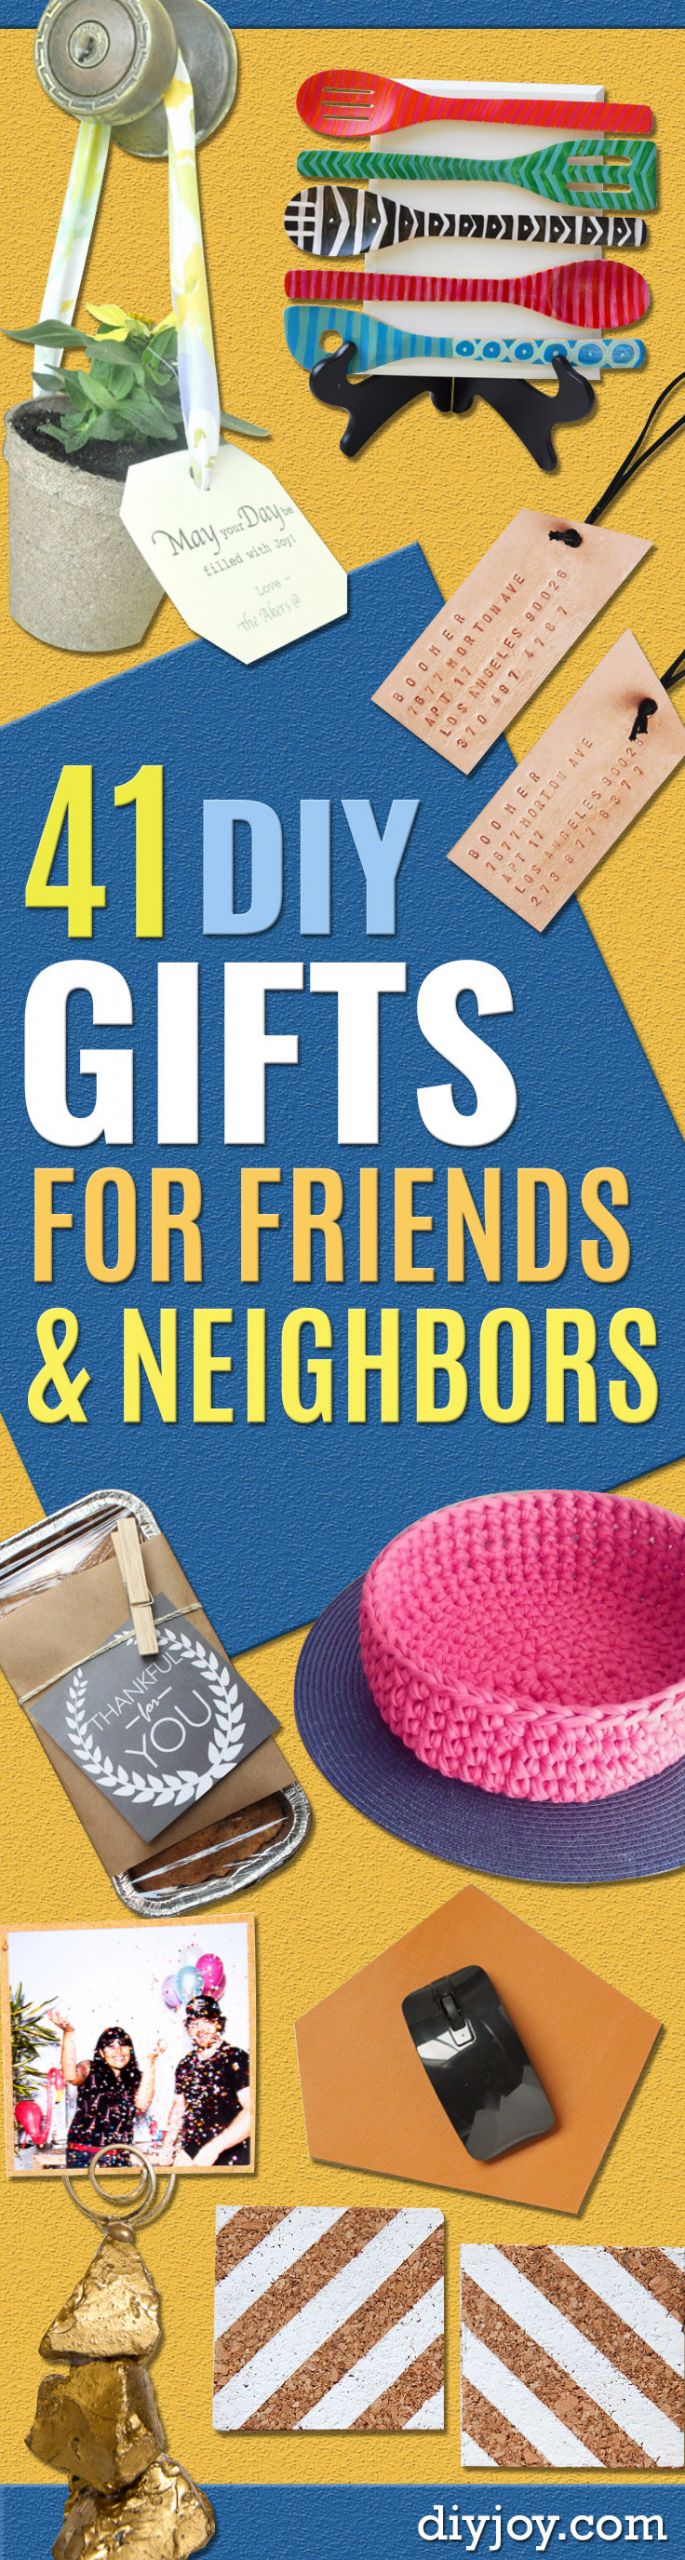 Friend Gifts DIY
 41 Best Gifts To Make for Friends and Neighbors